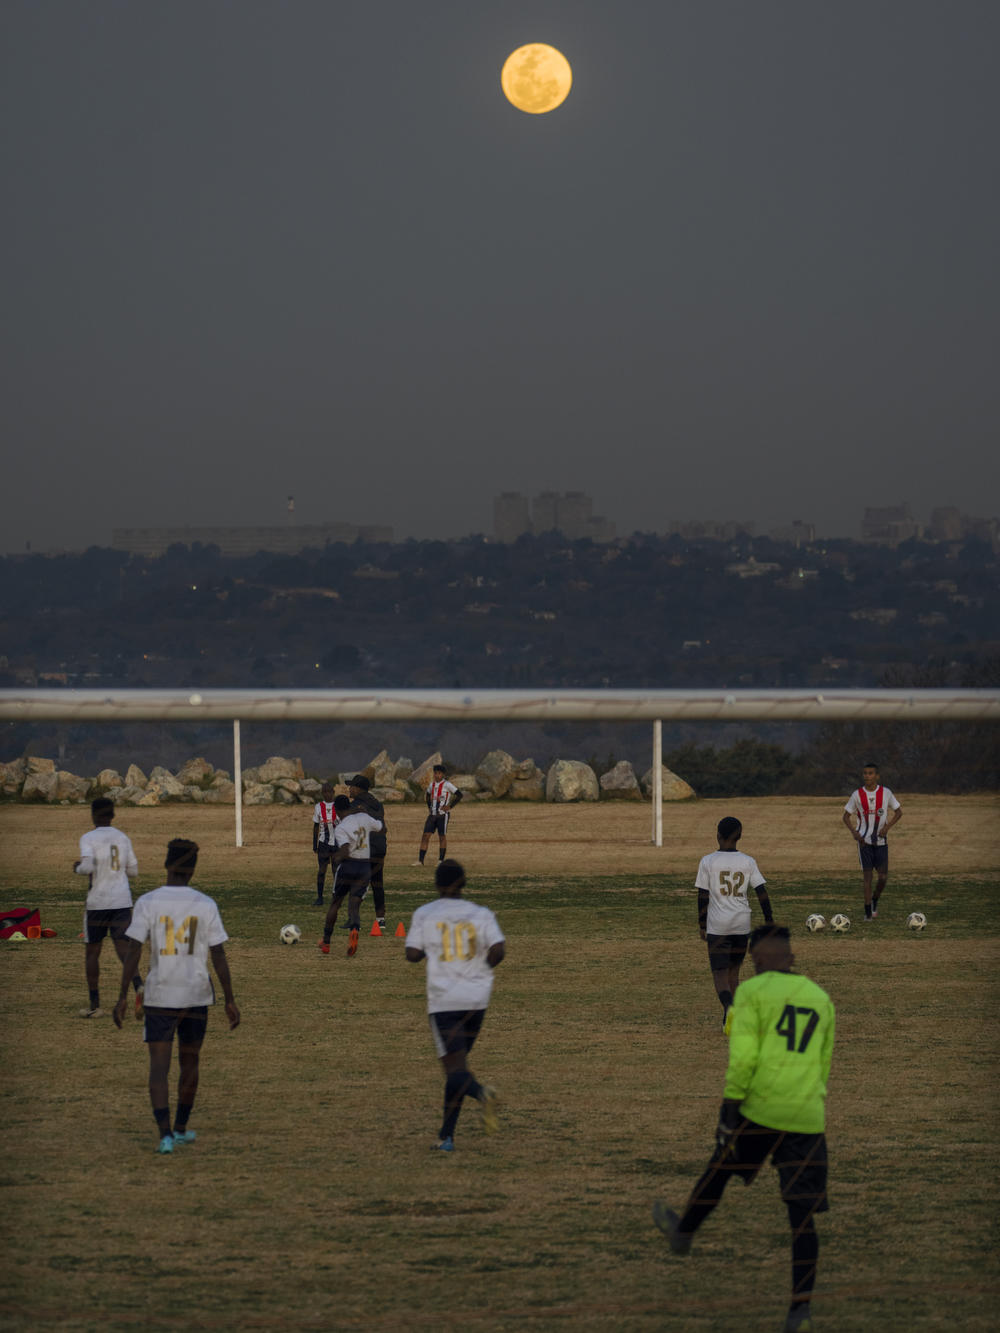 Football players in Johannesburg, South Africa, play with the supermoon rising in the background. The moon appeared bigger and brighter than normal because it was closer to Earth.